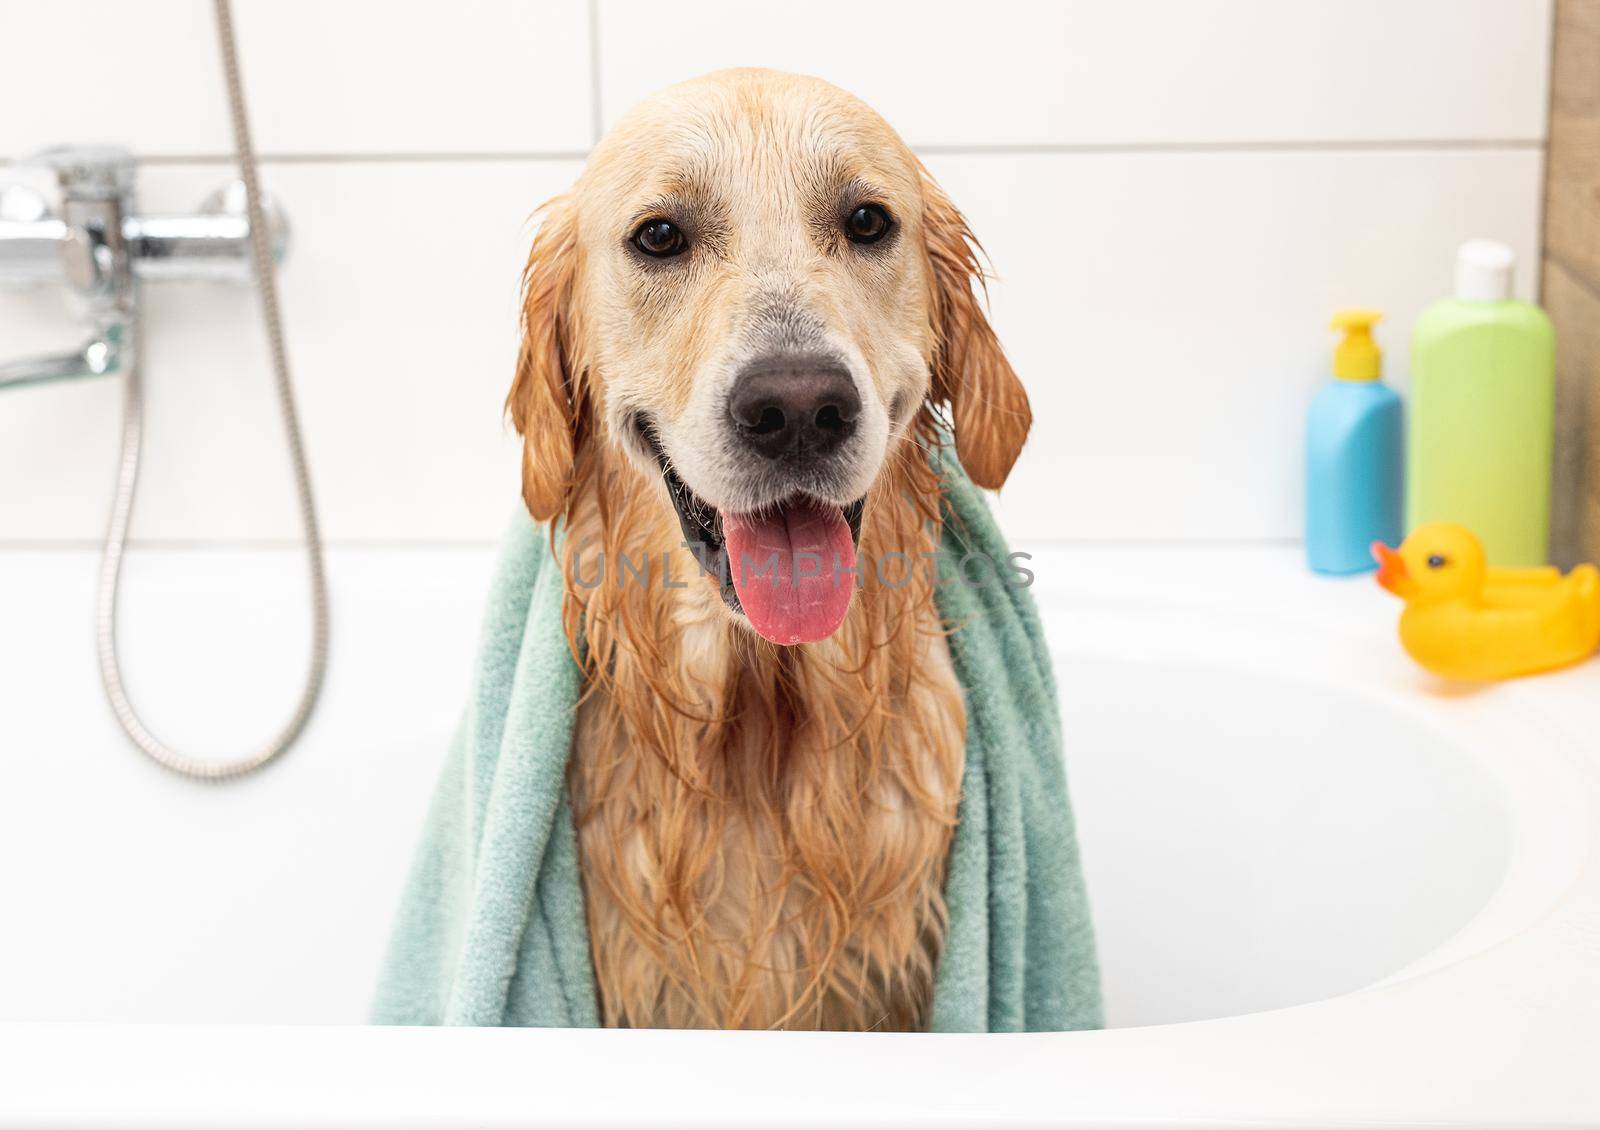 Golden retriever dog covered with towel in bathtub after washing